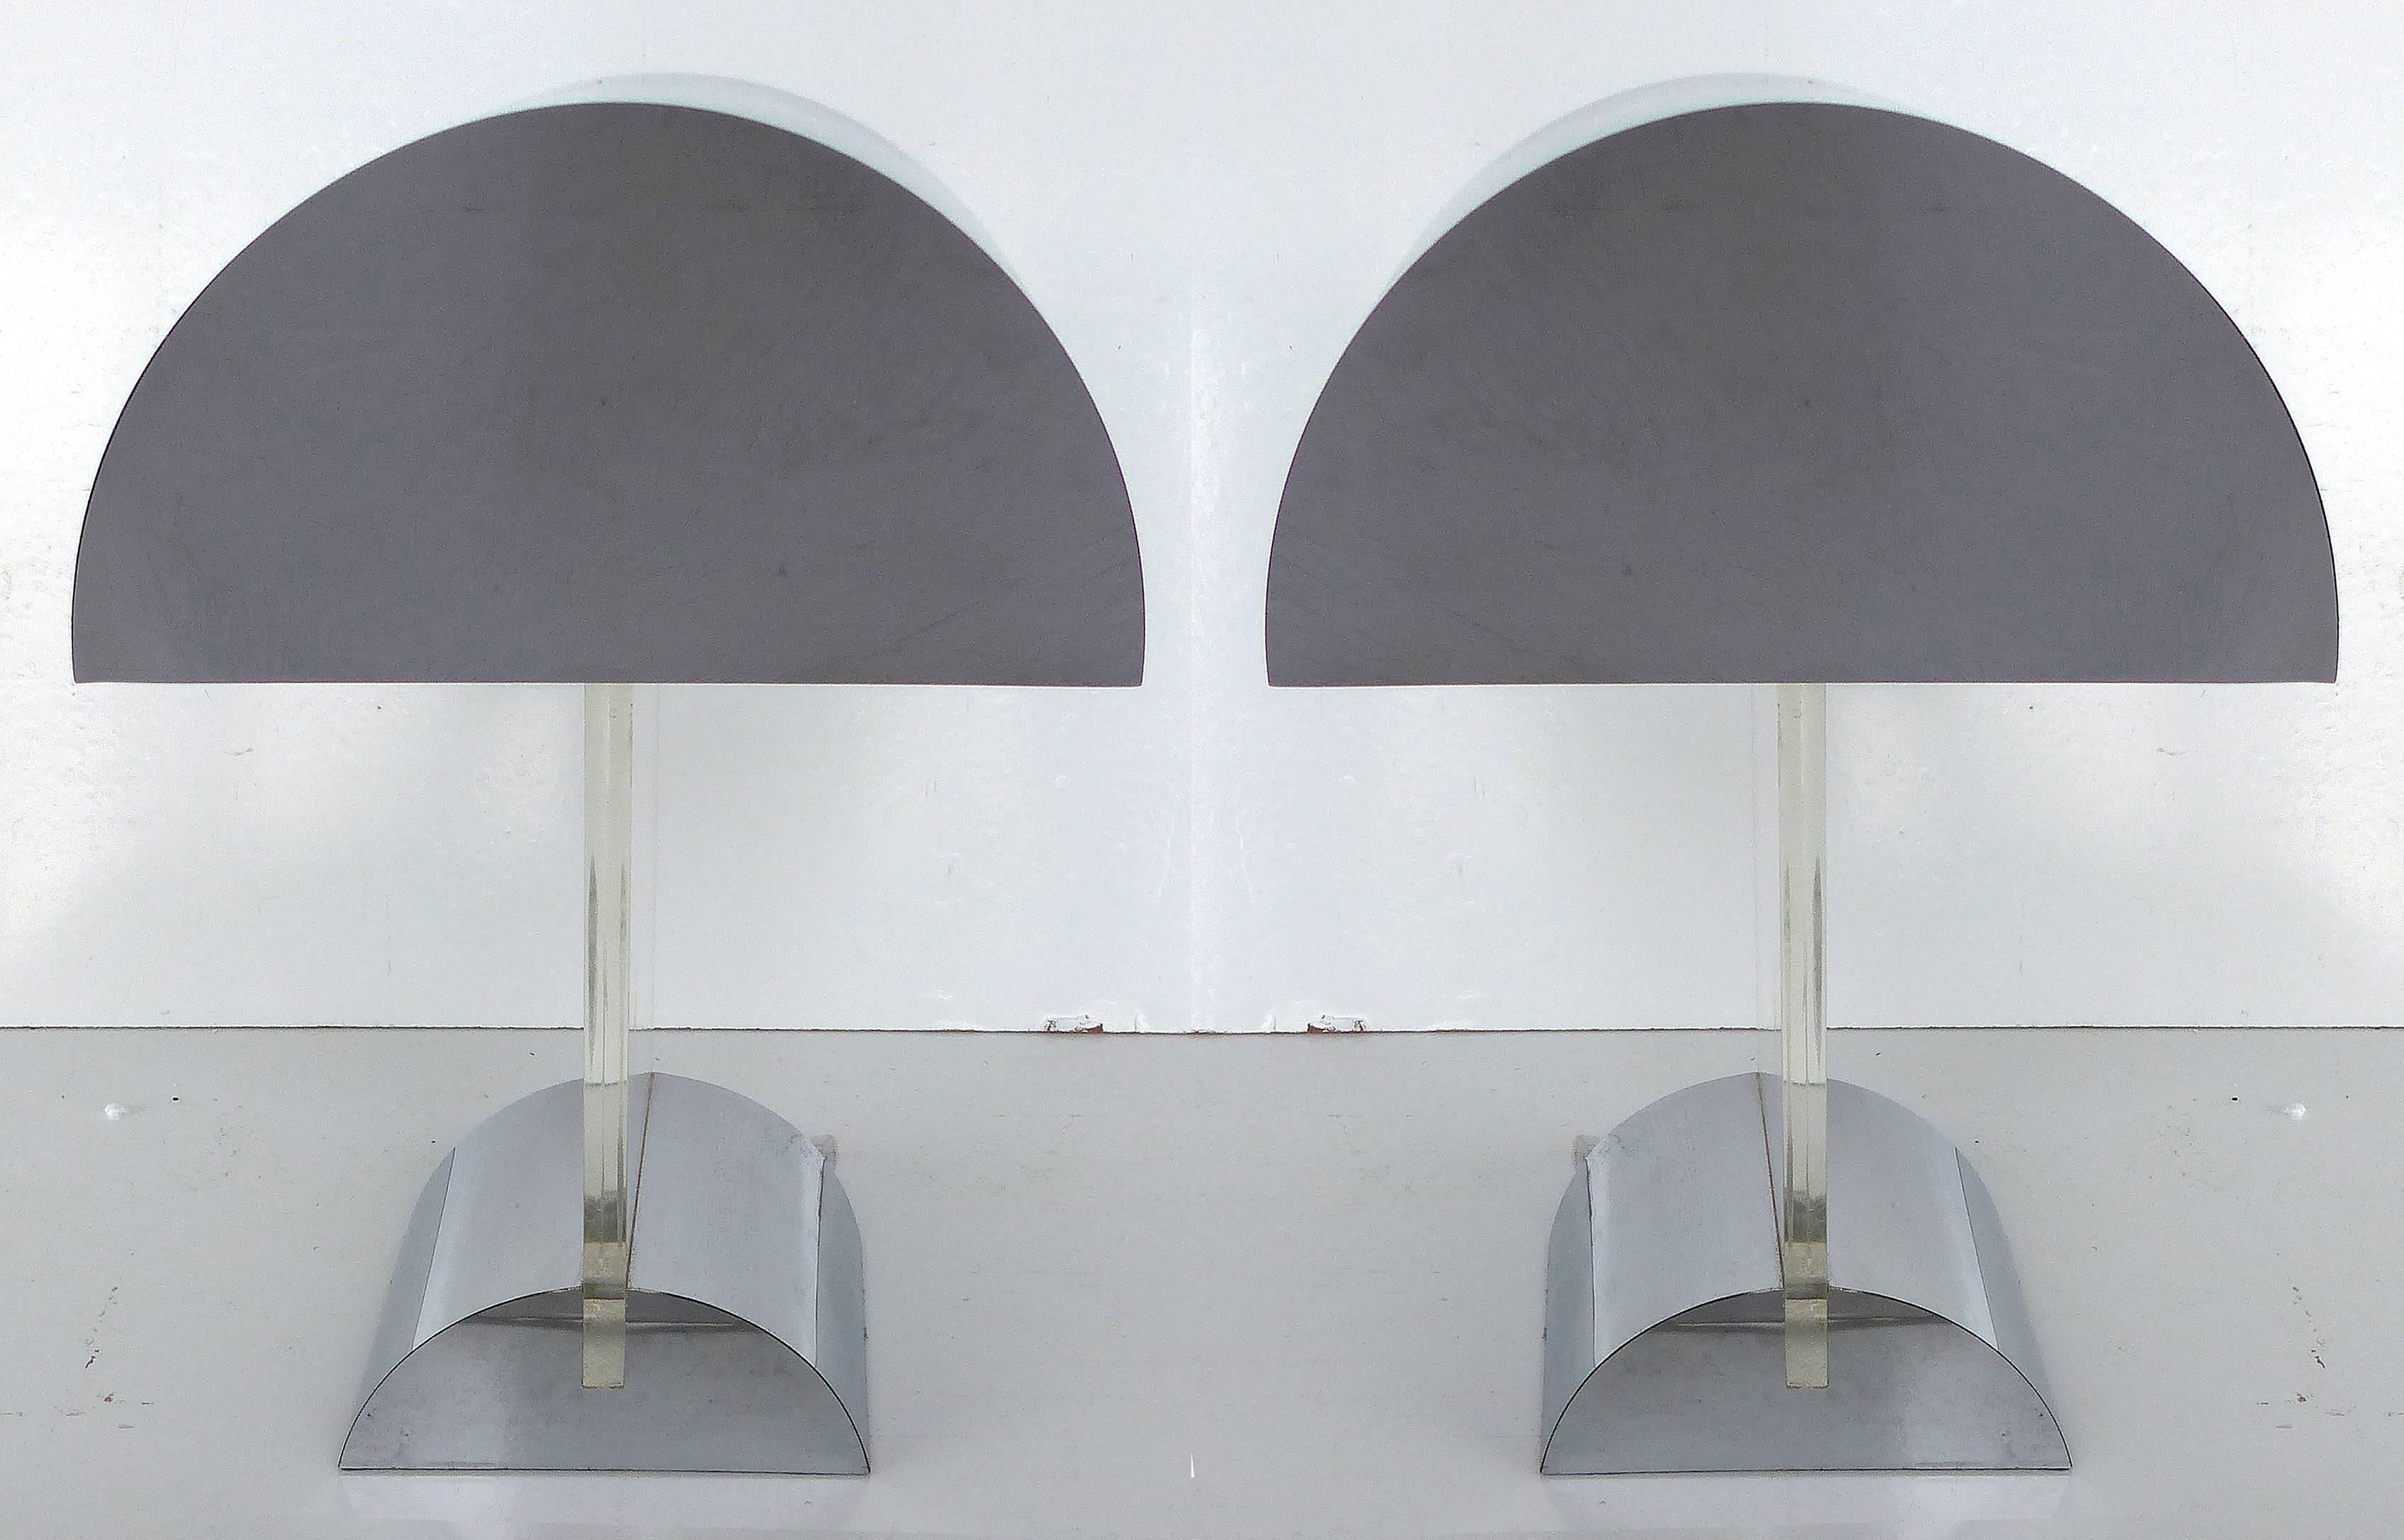 A pair of Mid-Century Modern curved dome top table lamps with matching bases and Lucite supports attributed to George Kovacs. The domes are clad in polished chrome metal which accents the thick Lucite center slabs. Wired and in working condition;